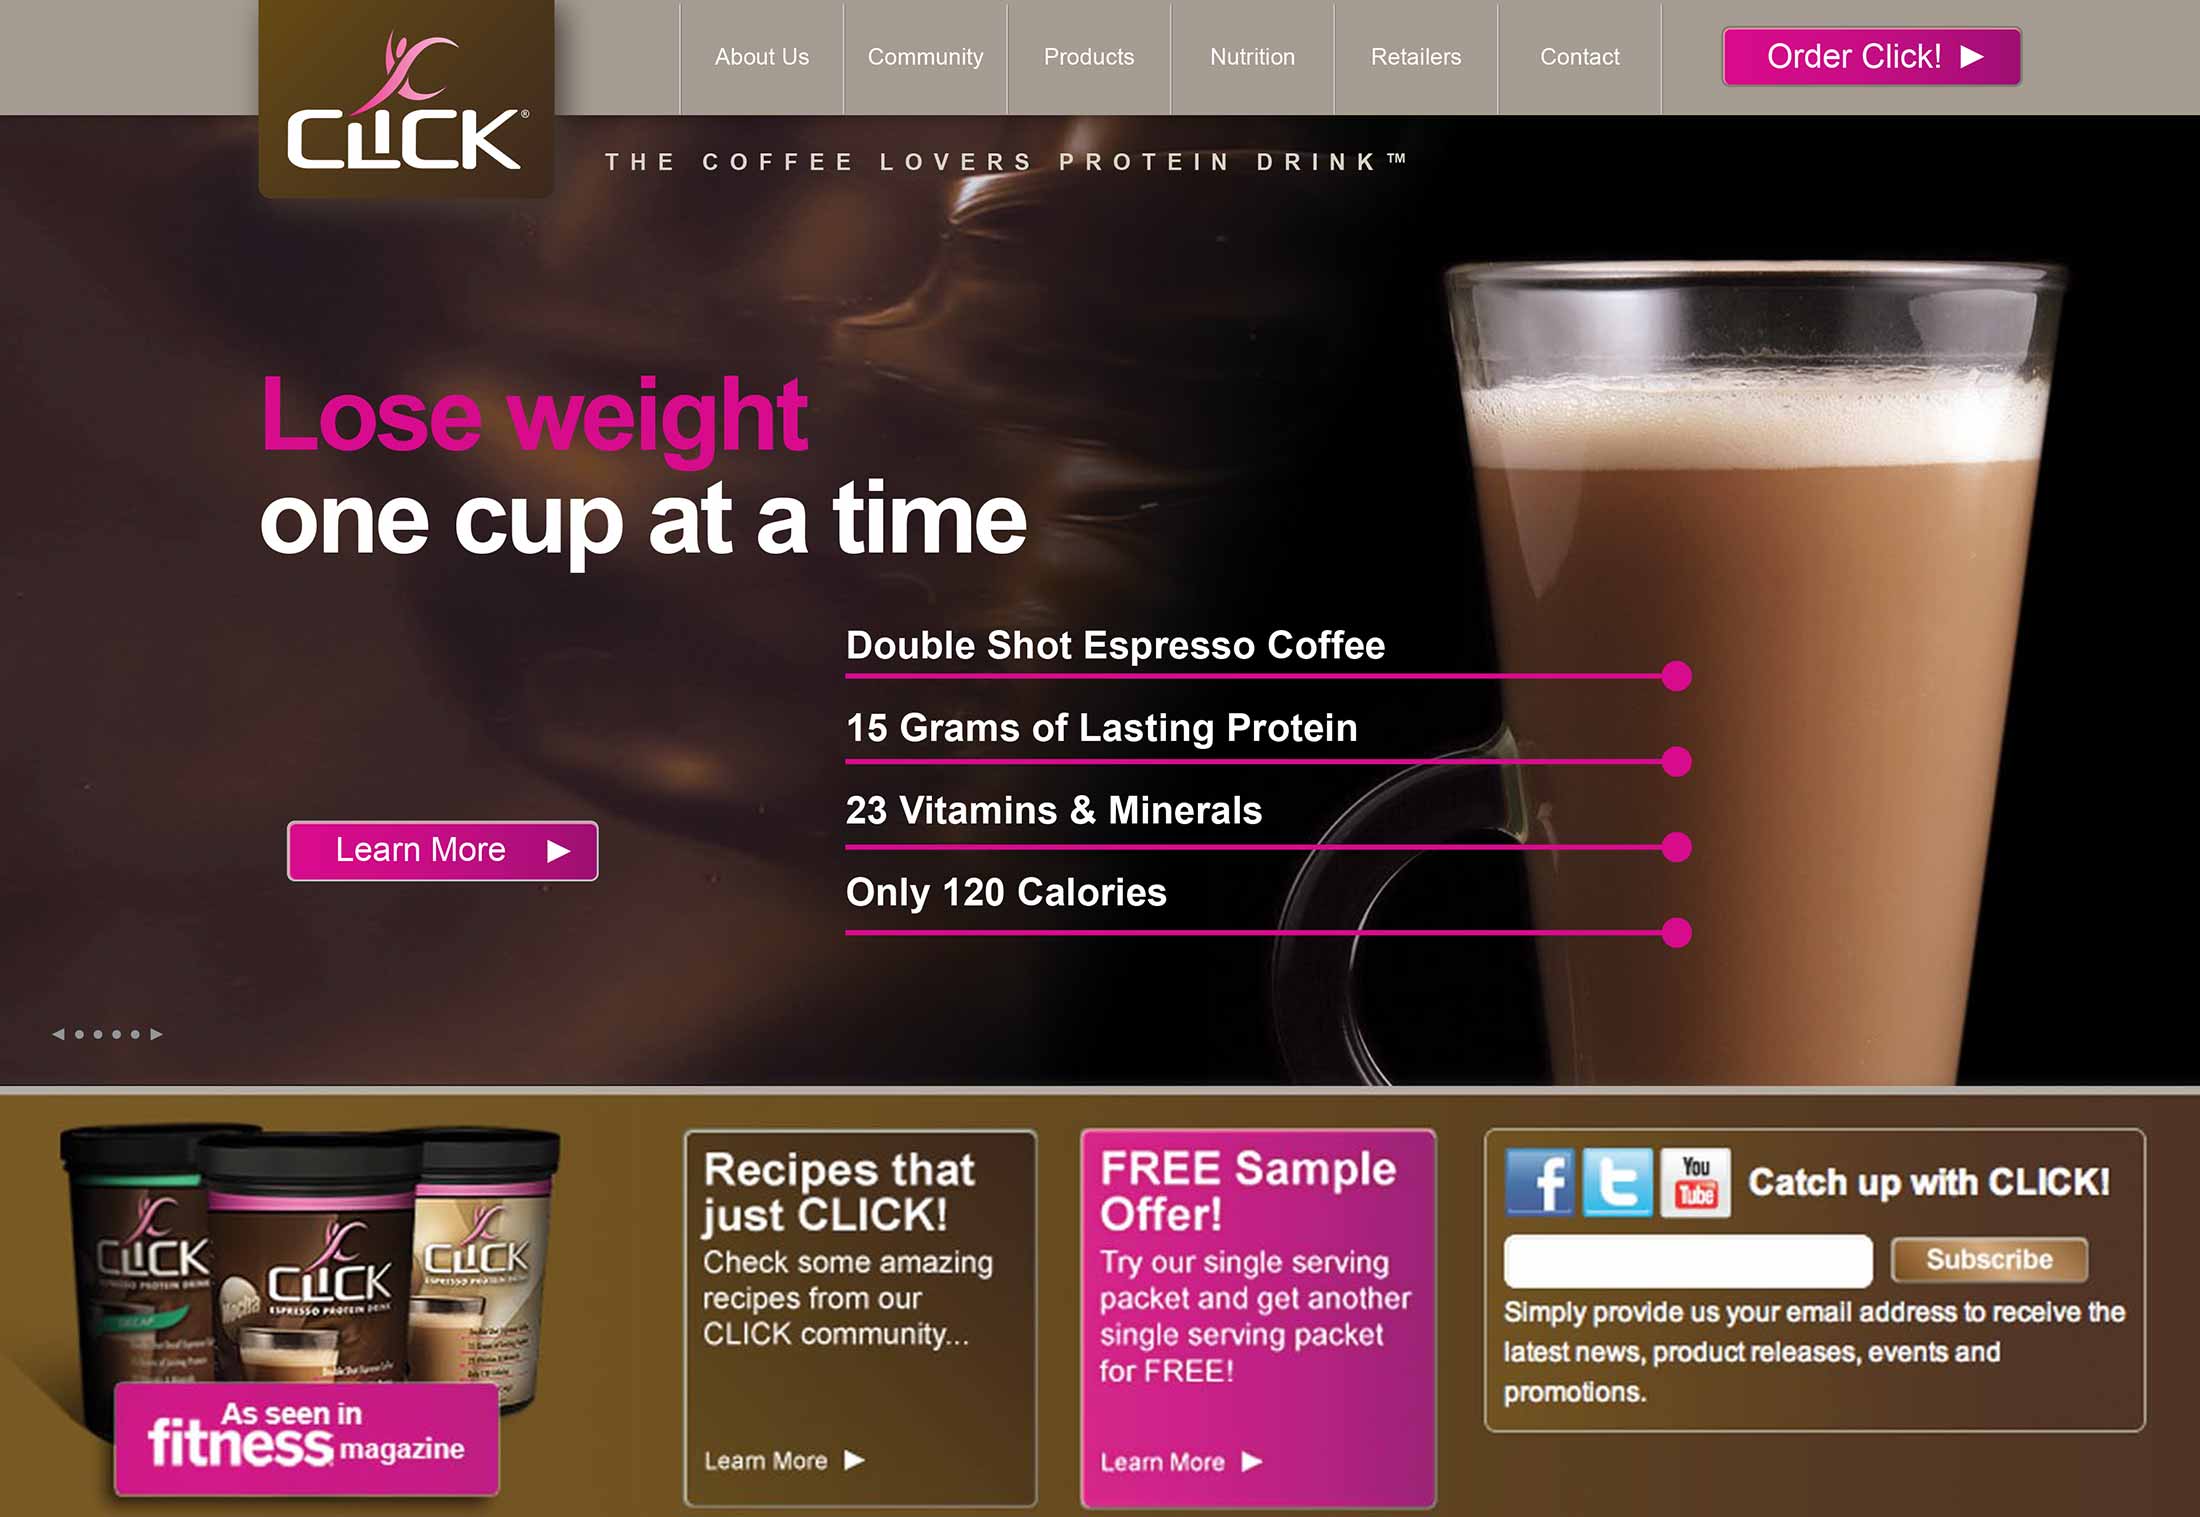 Screen shot of the Click web site by Lee Powers